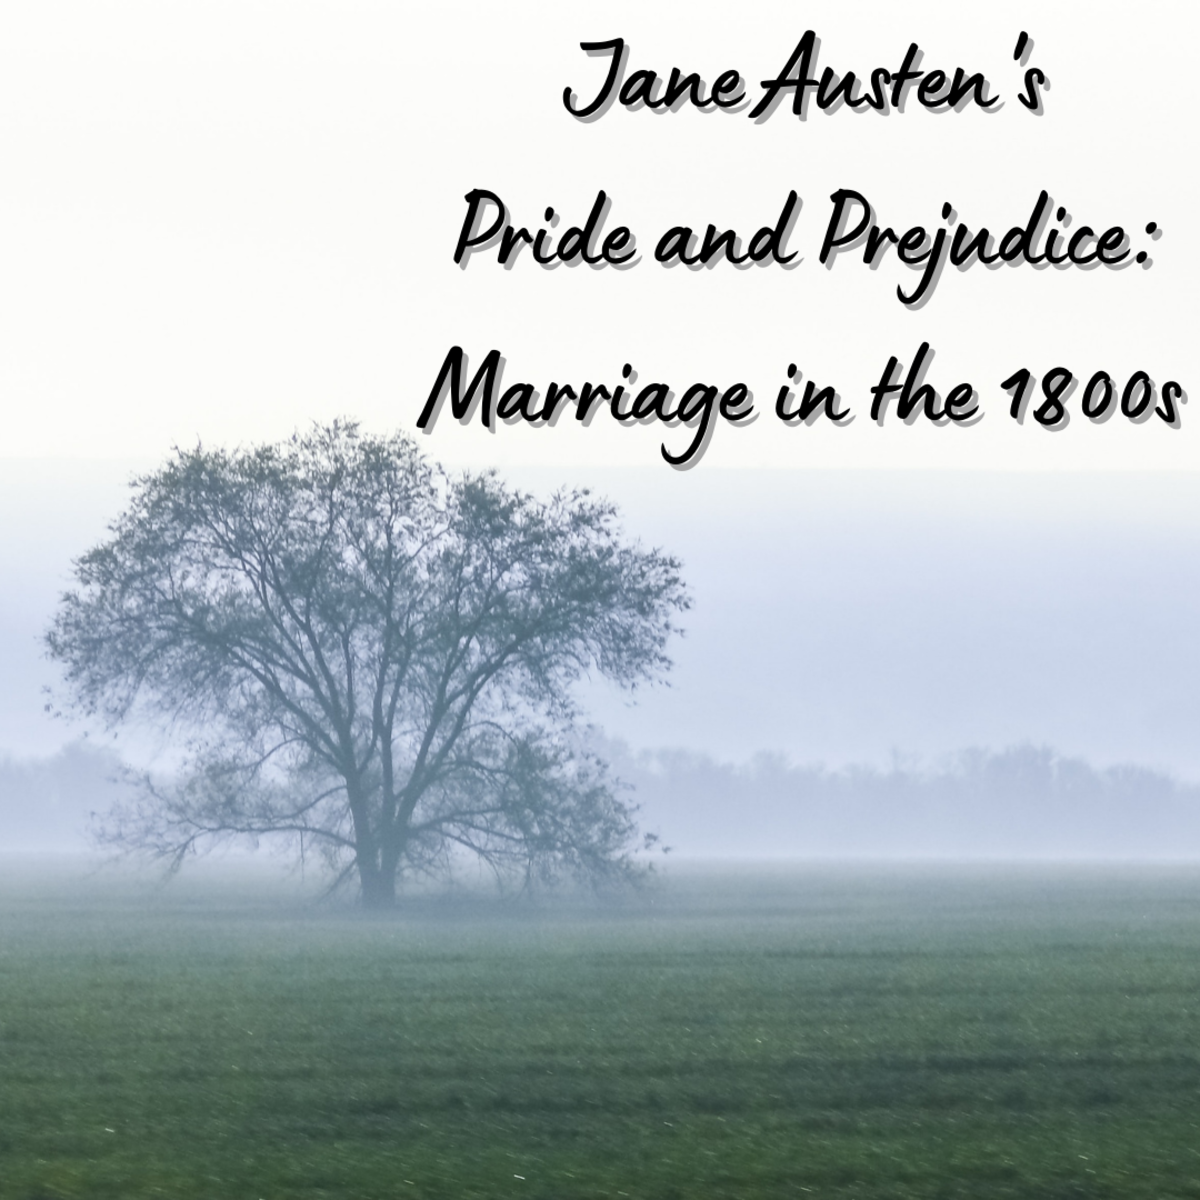 Marriage in "Pride and Prejudice" by Jane Austen